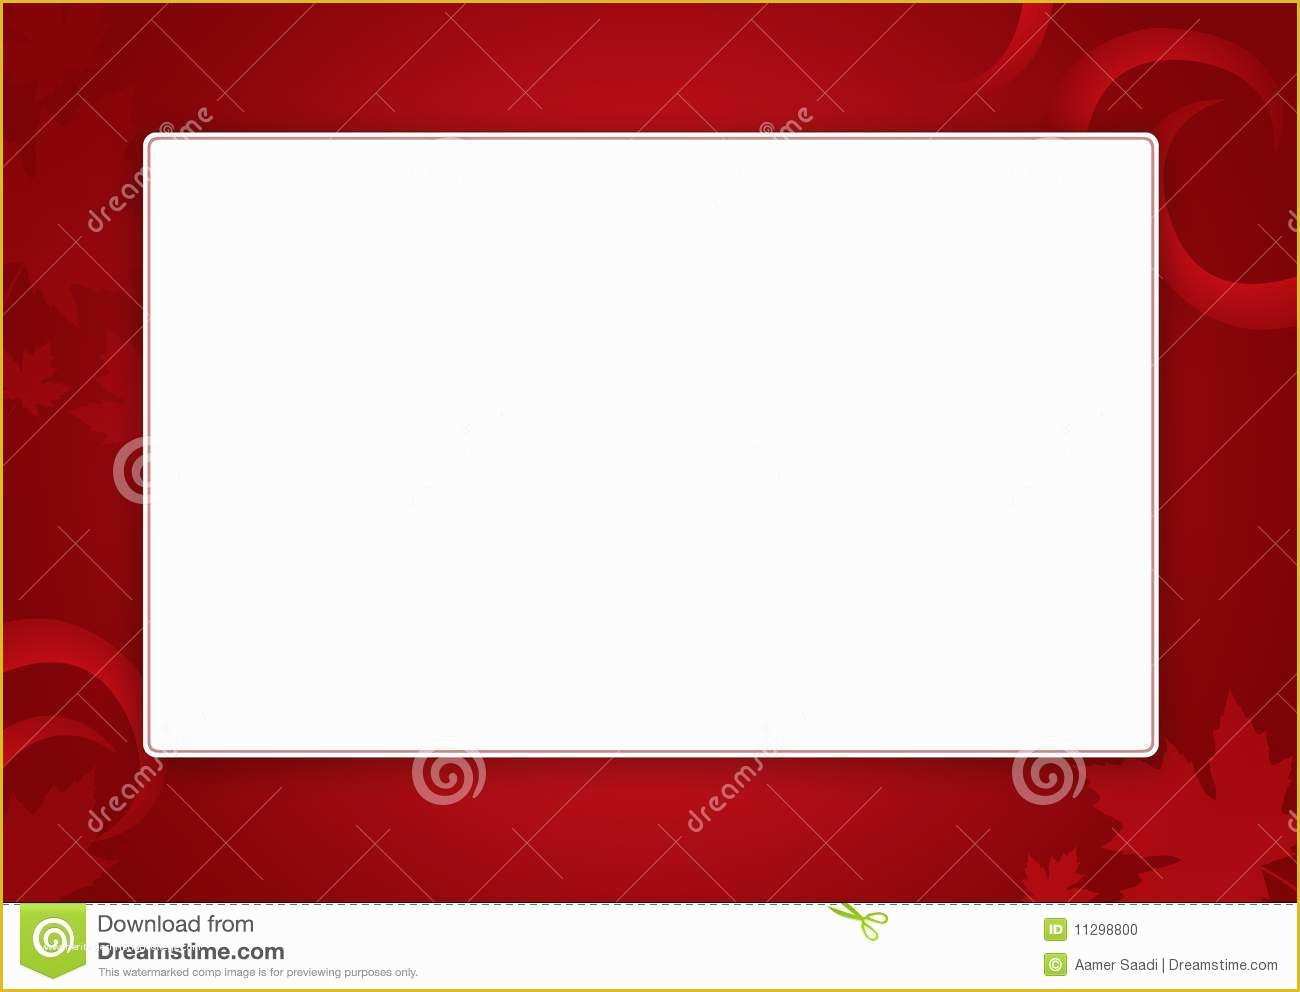 Free Online Greeting Card Templates Of Greeting Card Template Stock Illustration Illustration Of